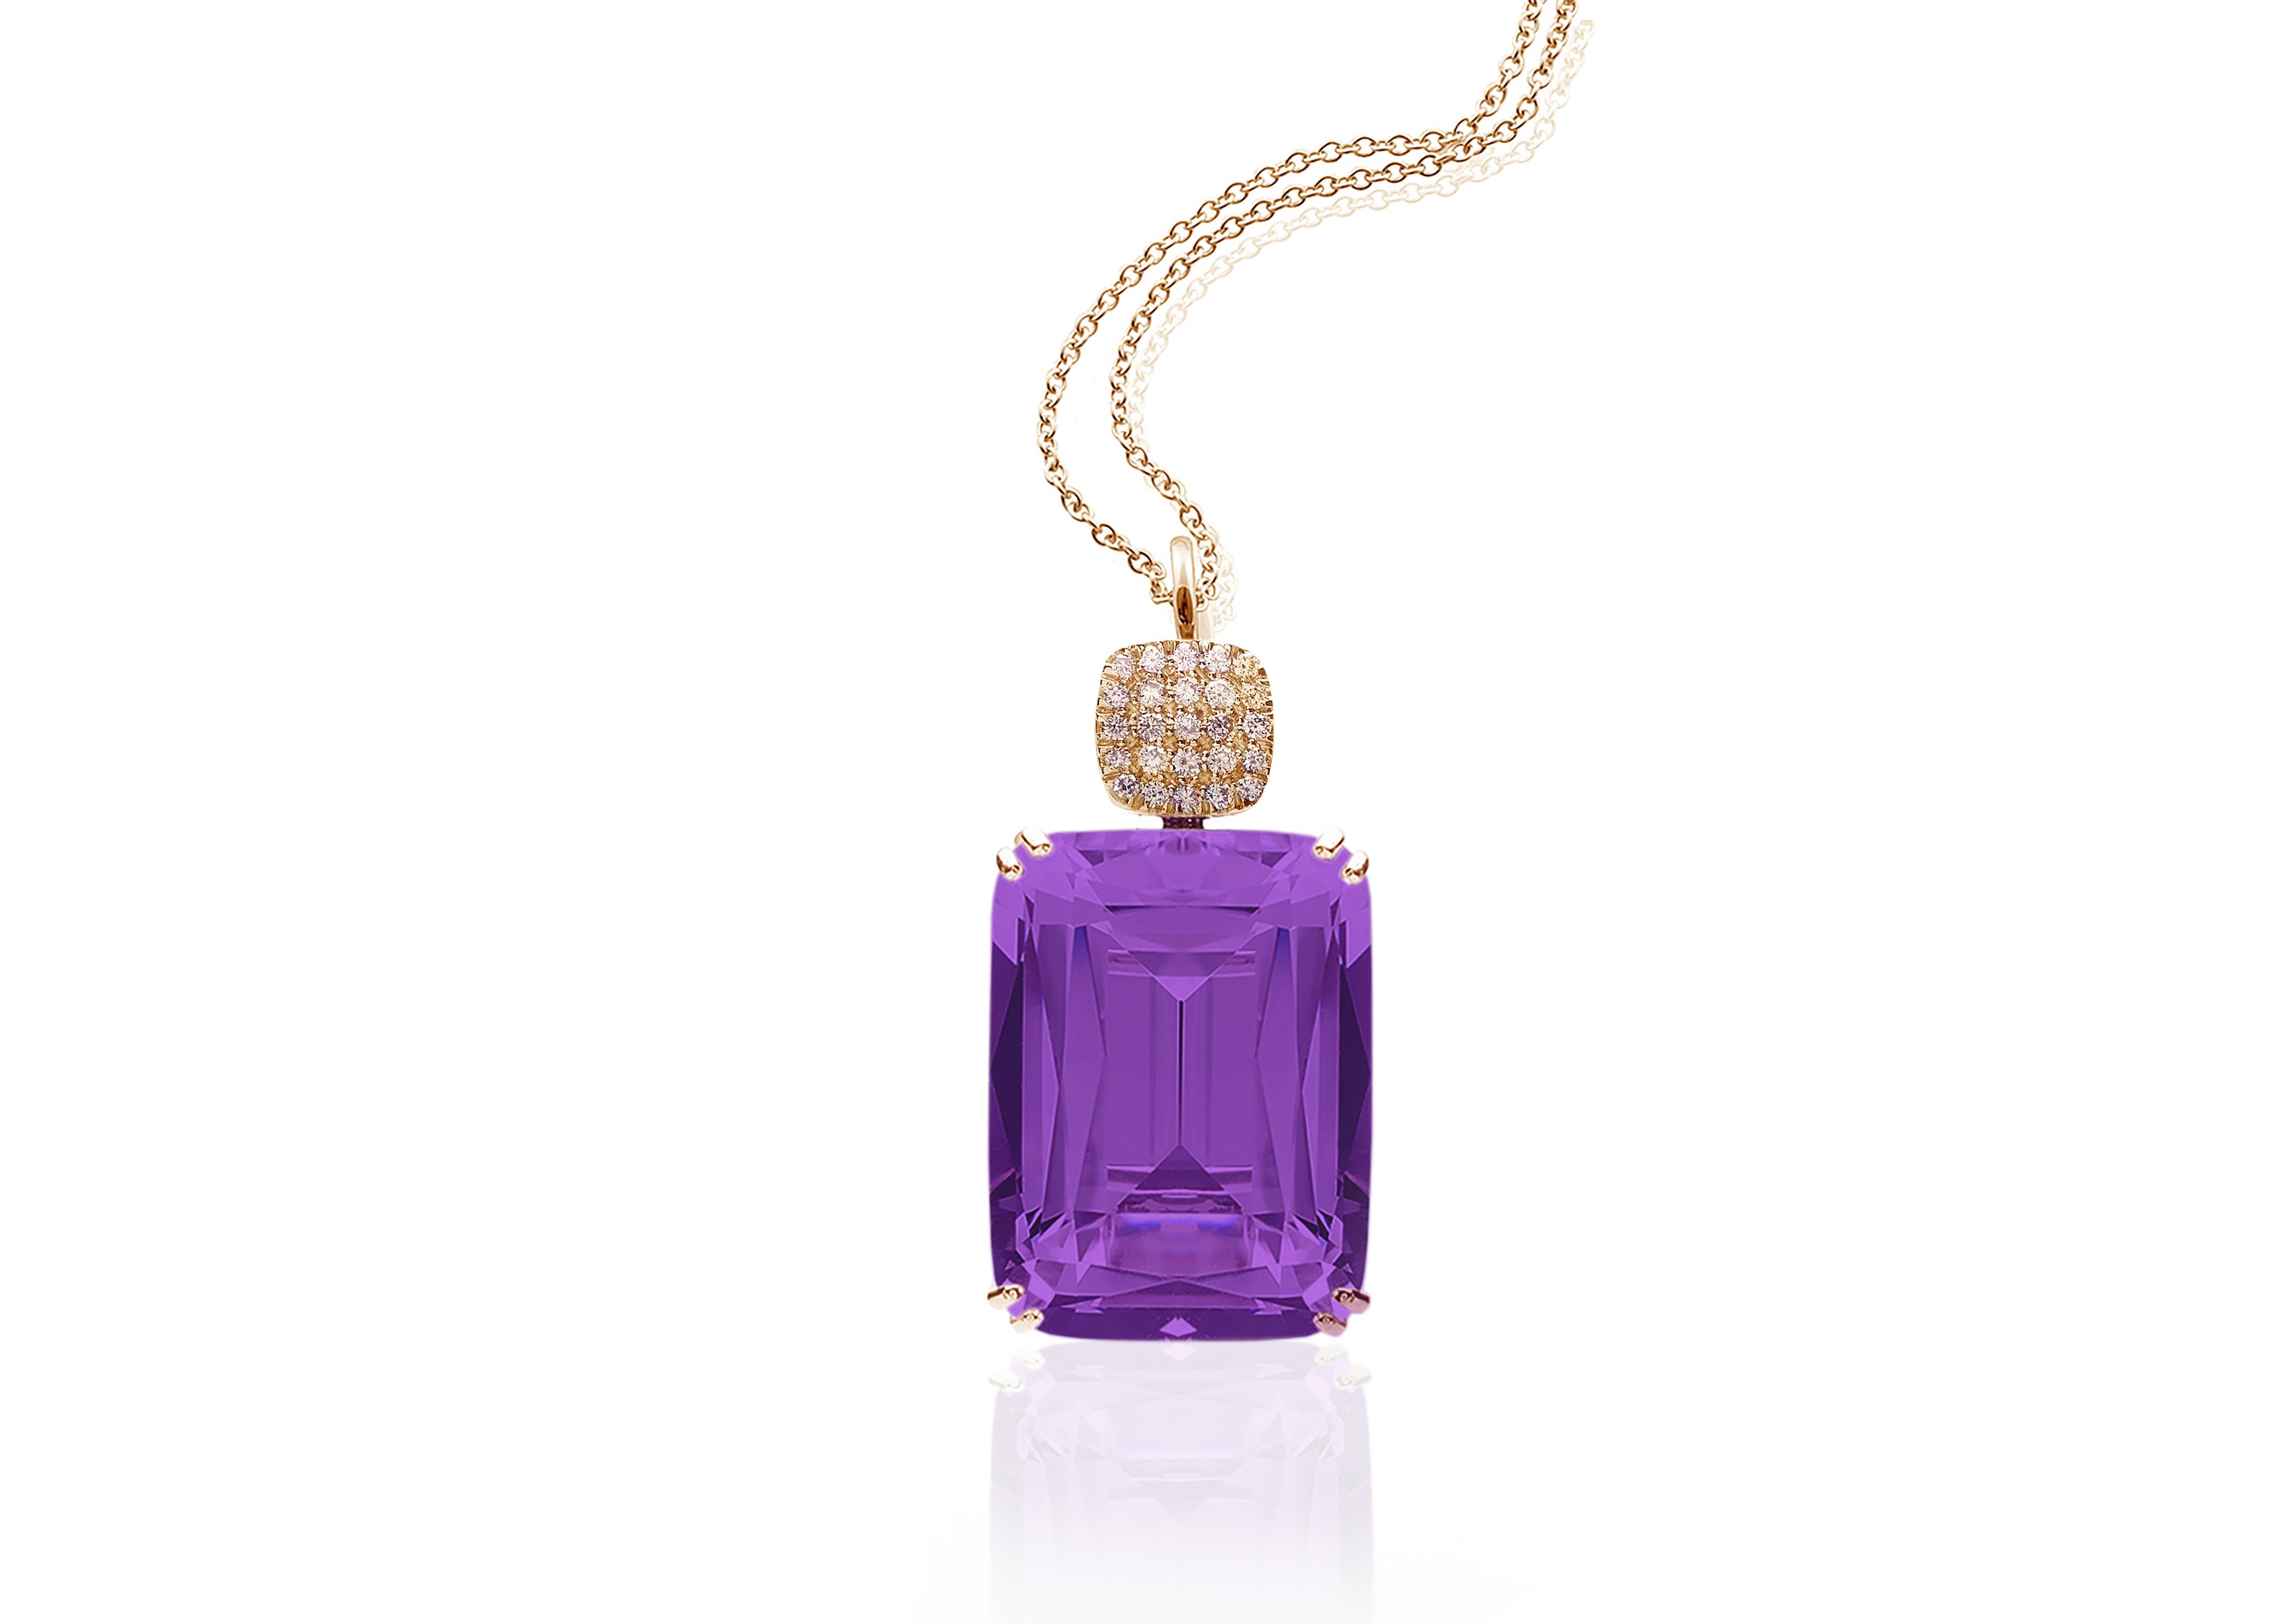 Amethyst Cushion Pendant in 18K Pink Gold with Diamonds  from 'Gossip' Collection

Chain Lenght 18